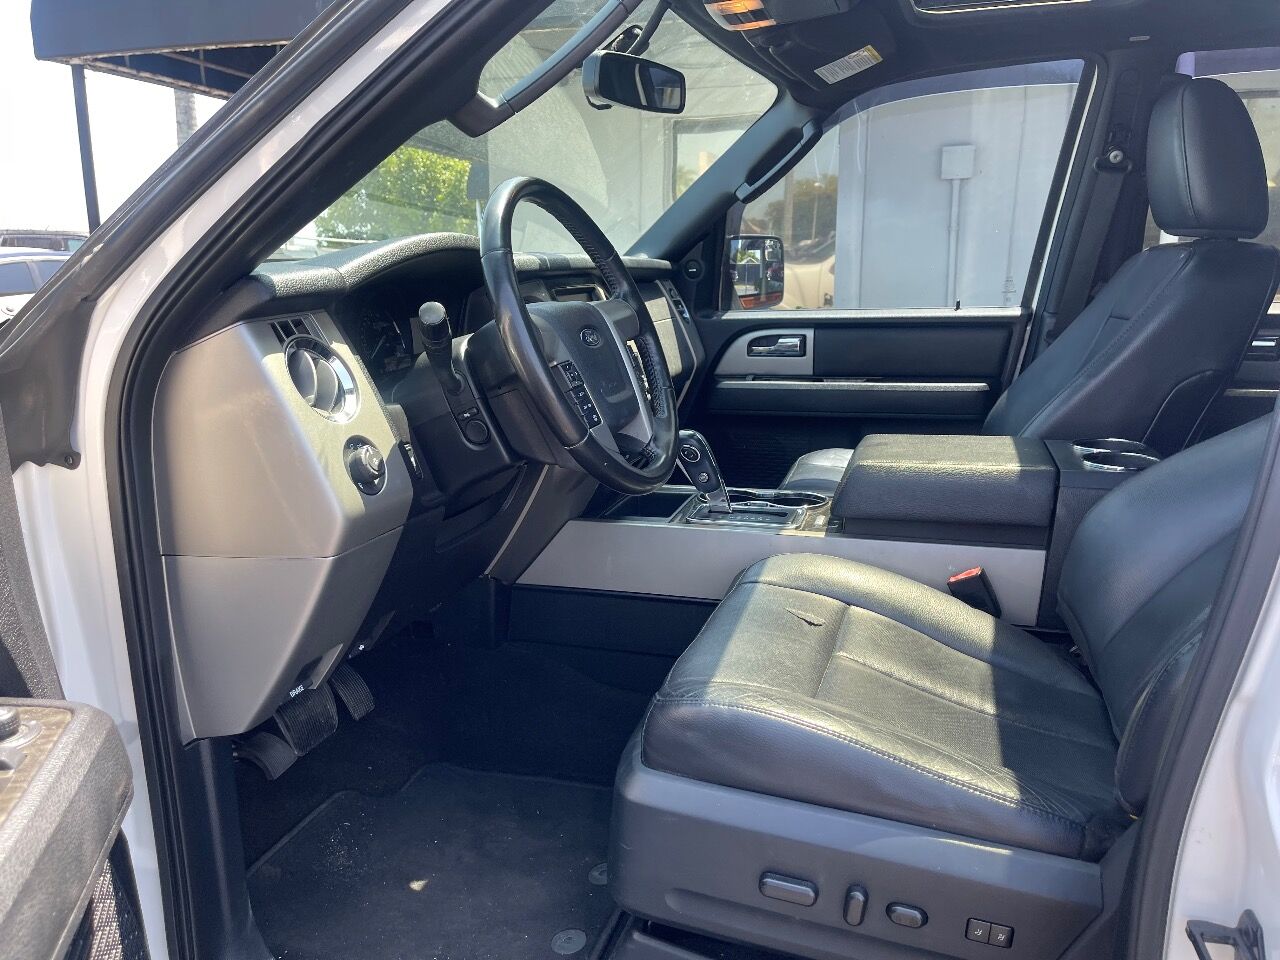 2015 Ford Expedition SUV - $18,900